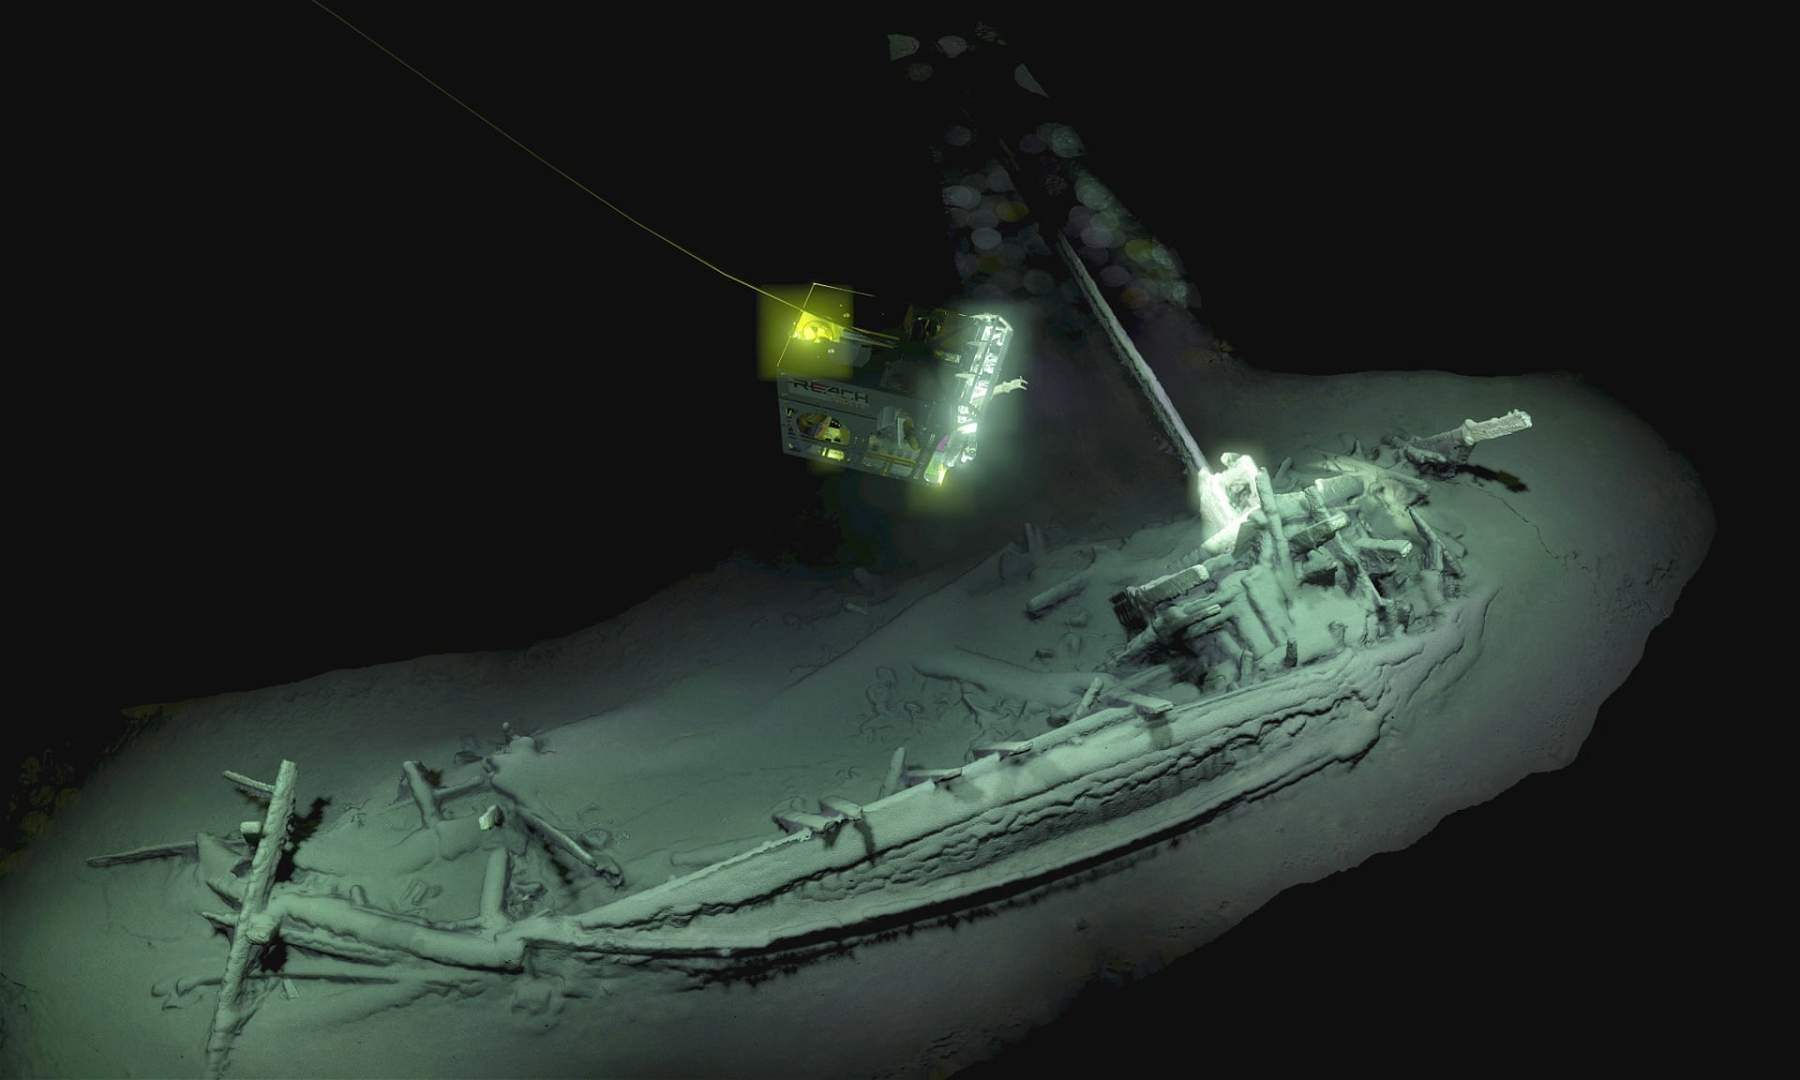 Epoch-making discovery at the bottom of the Black Sea, found the oldest ship ever: it is 2,400 years old